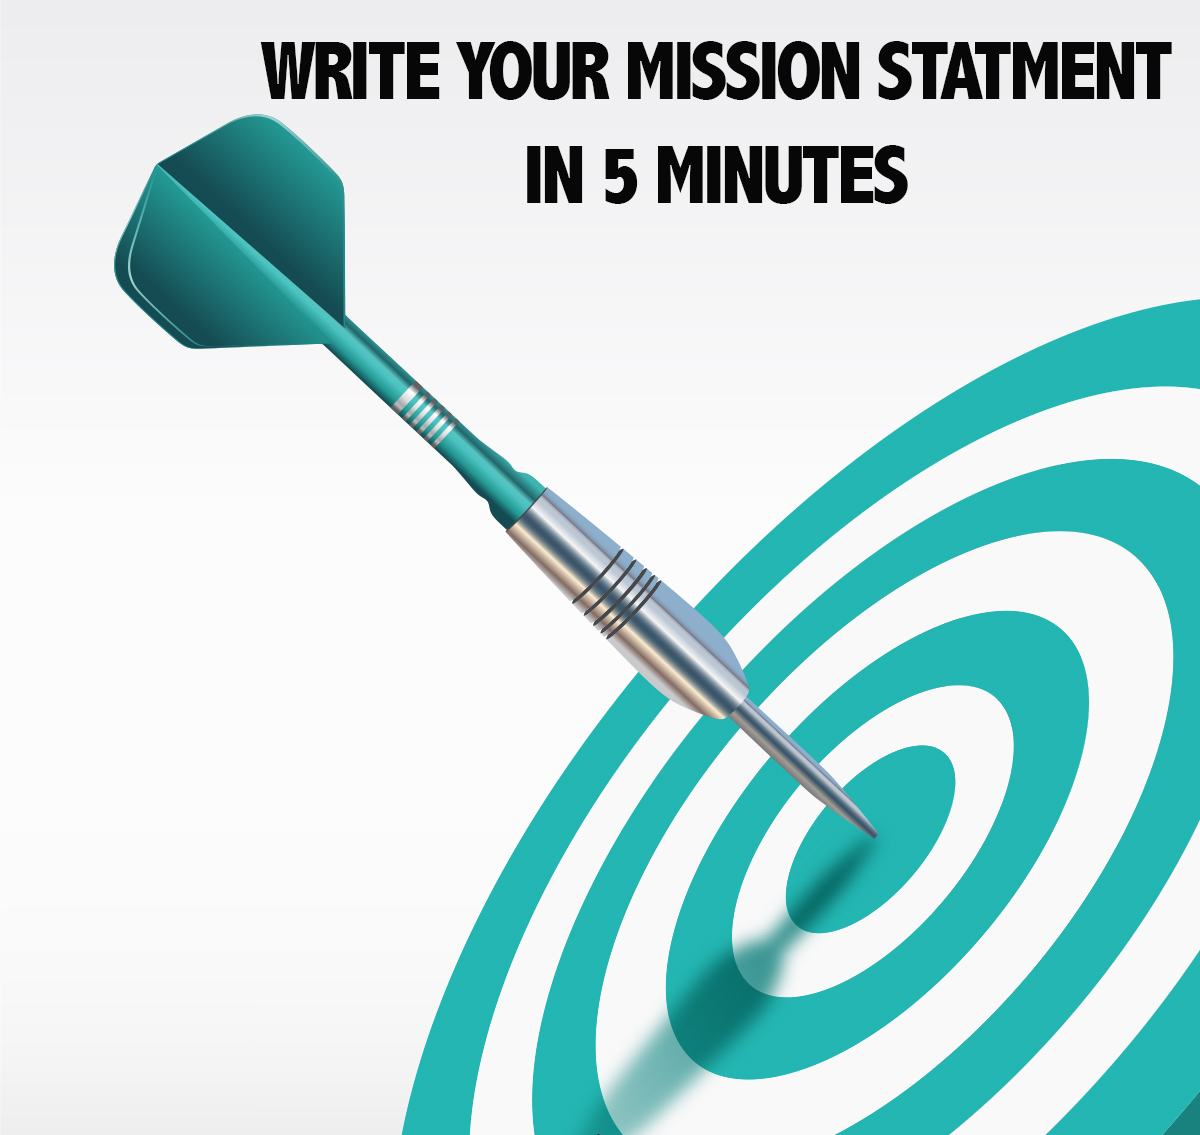 5 steps for writing your mission statement